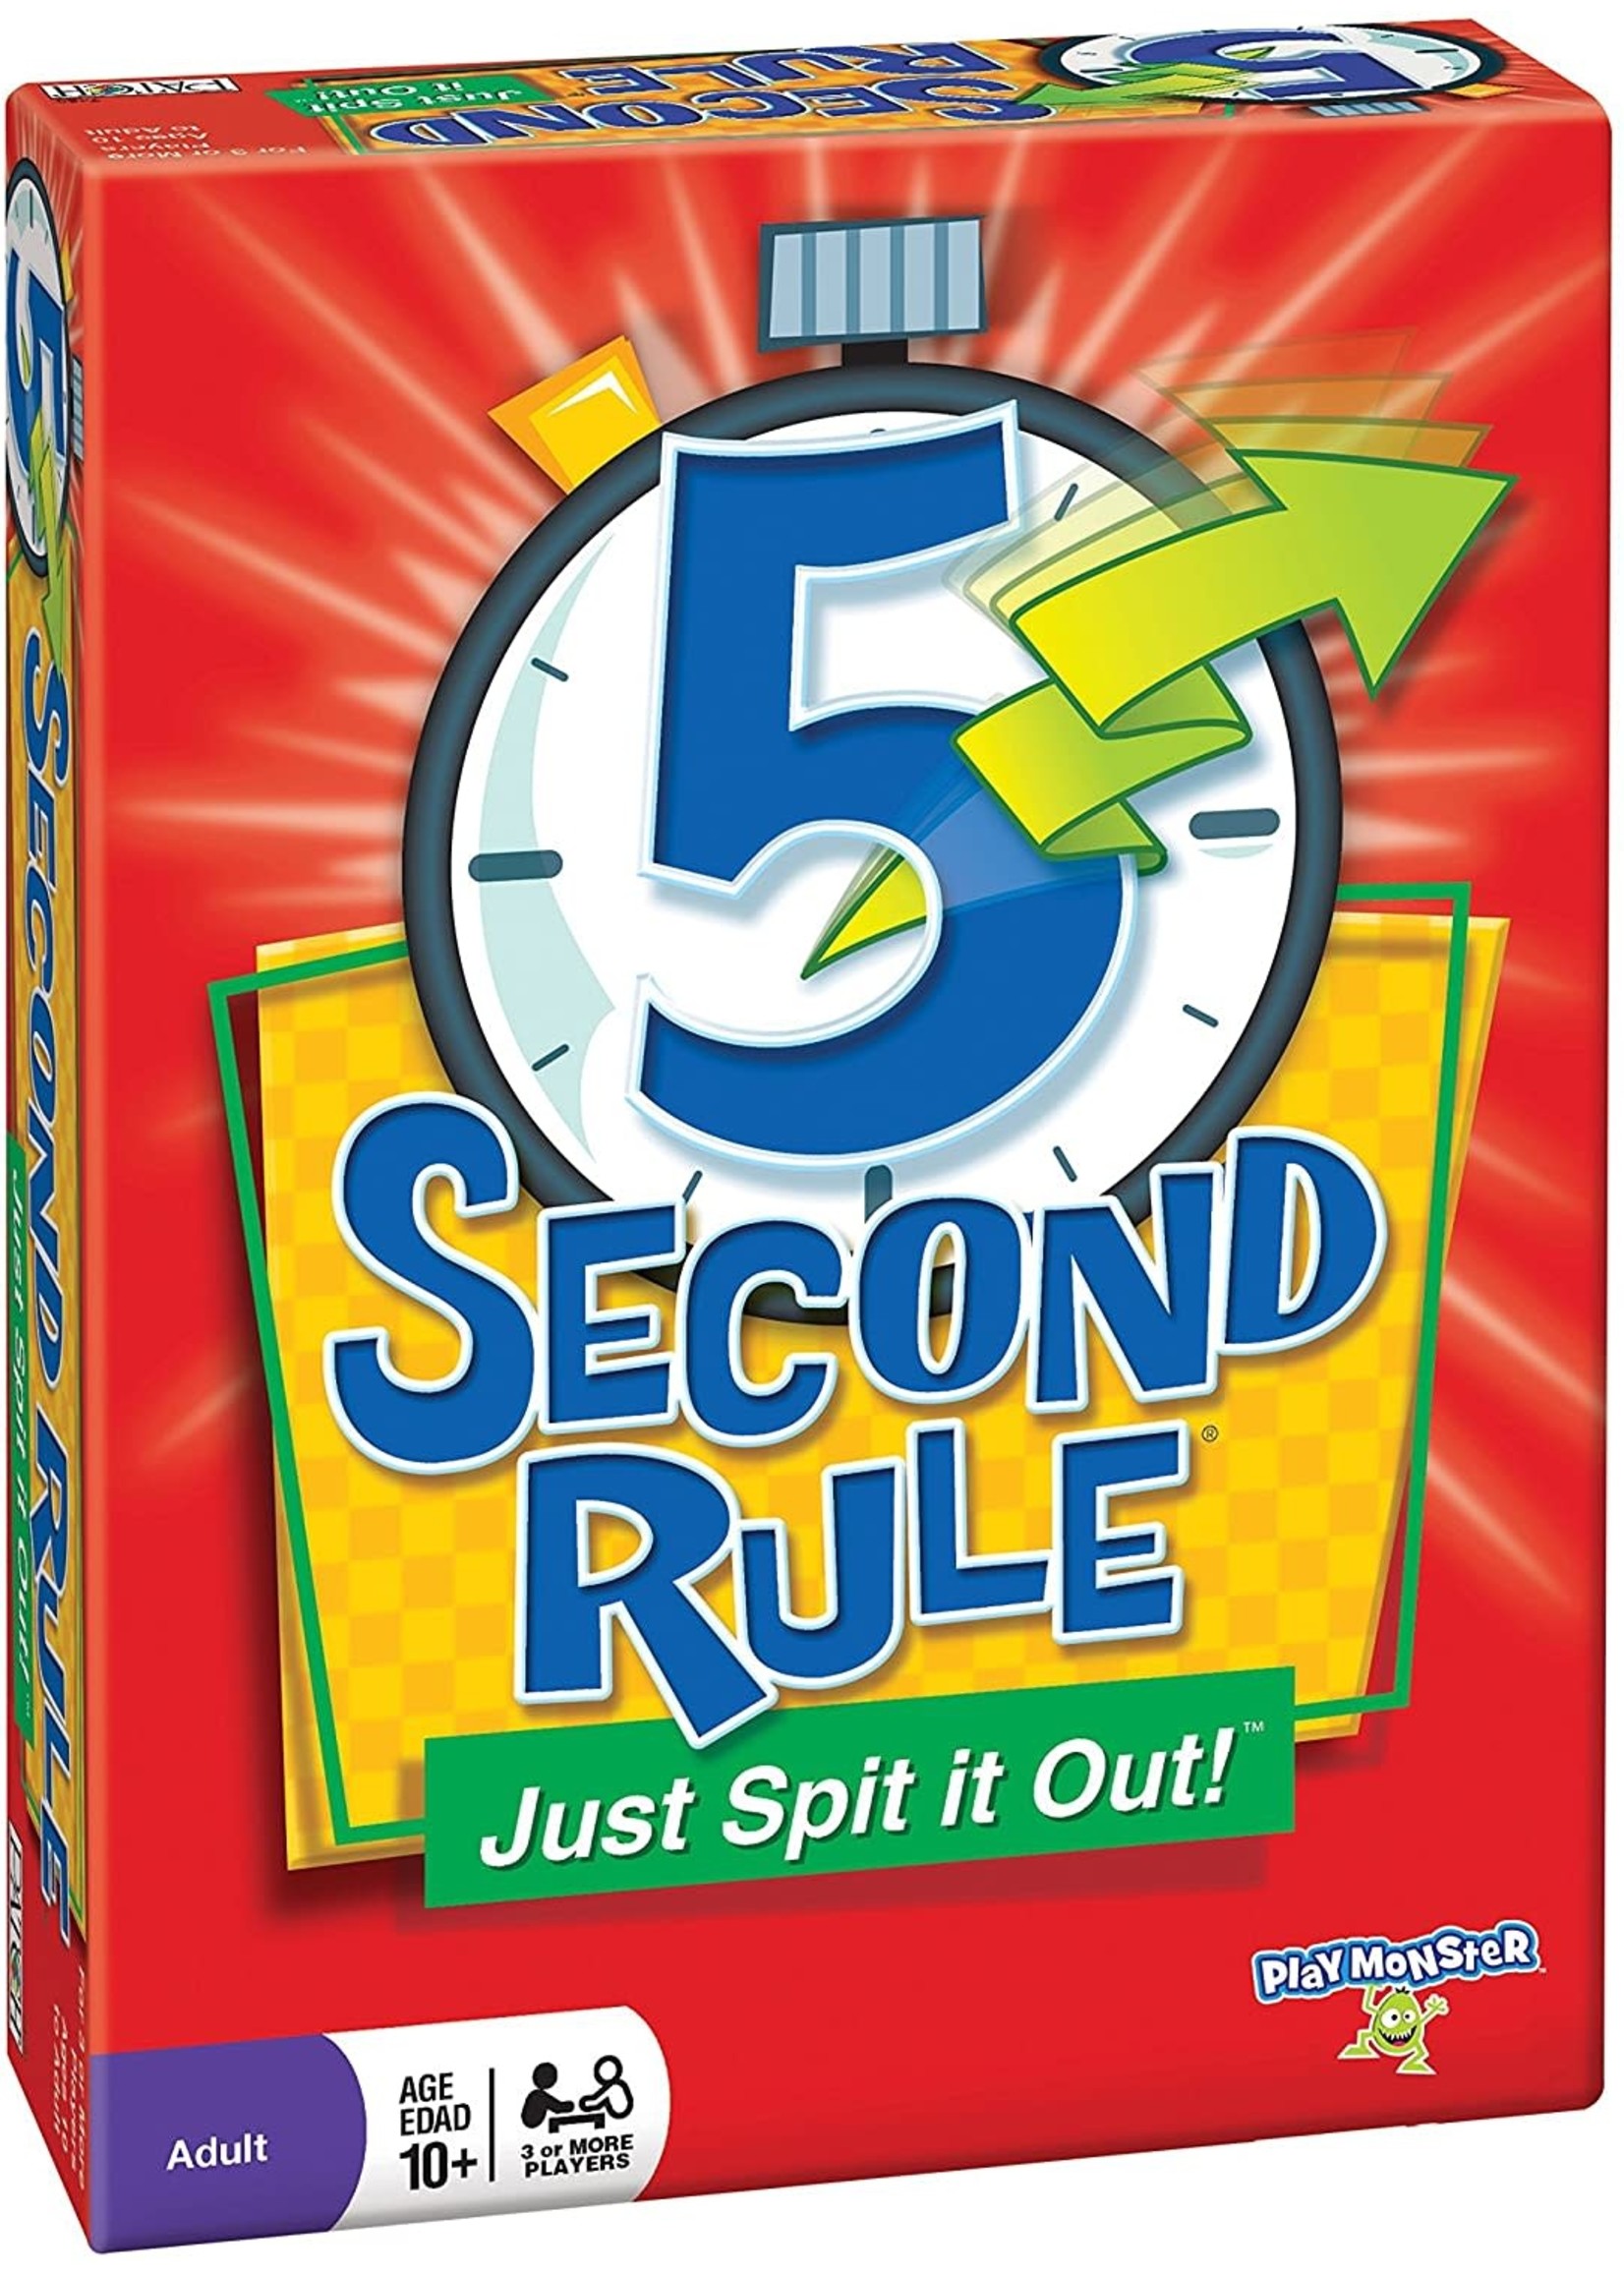 Play Monster 5 second rule (bilingue)